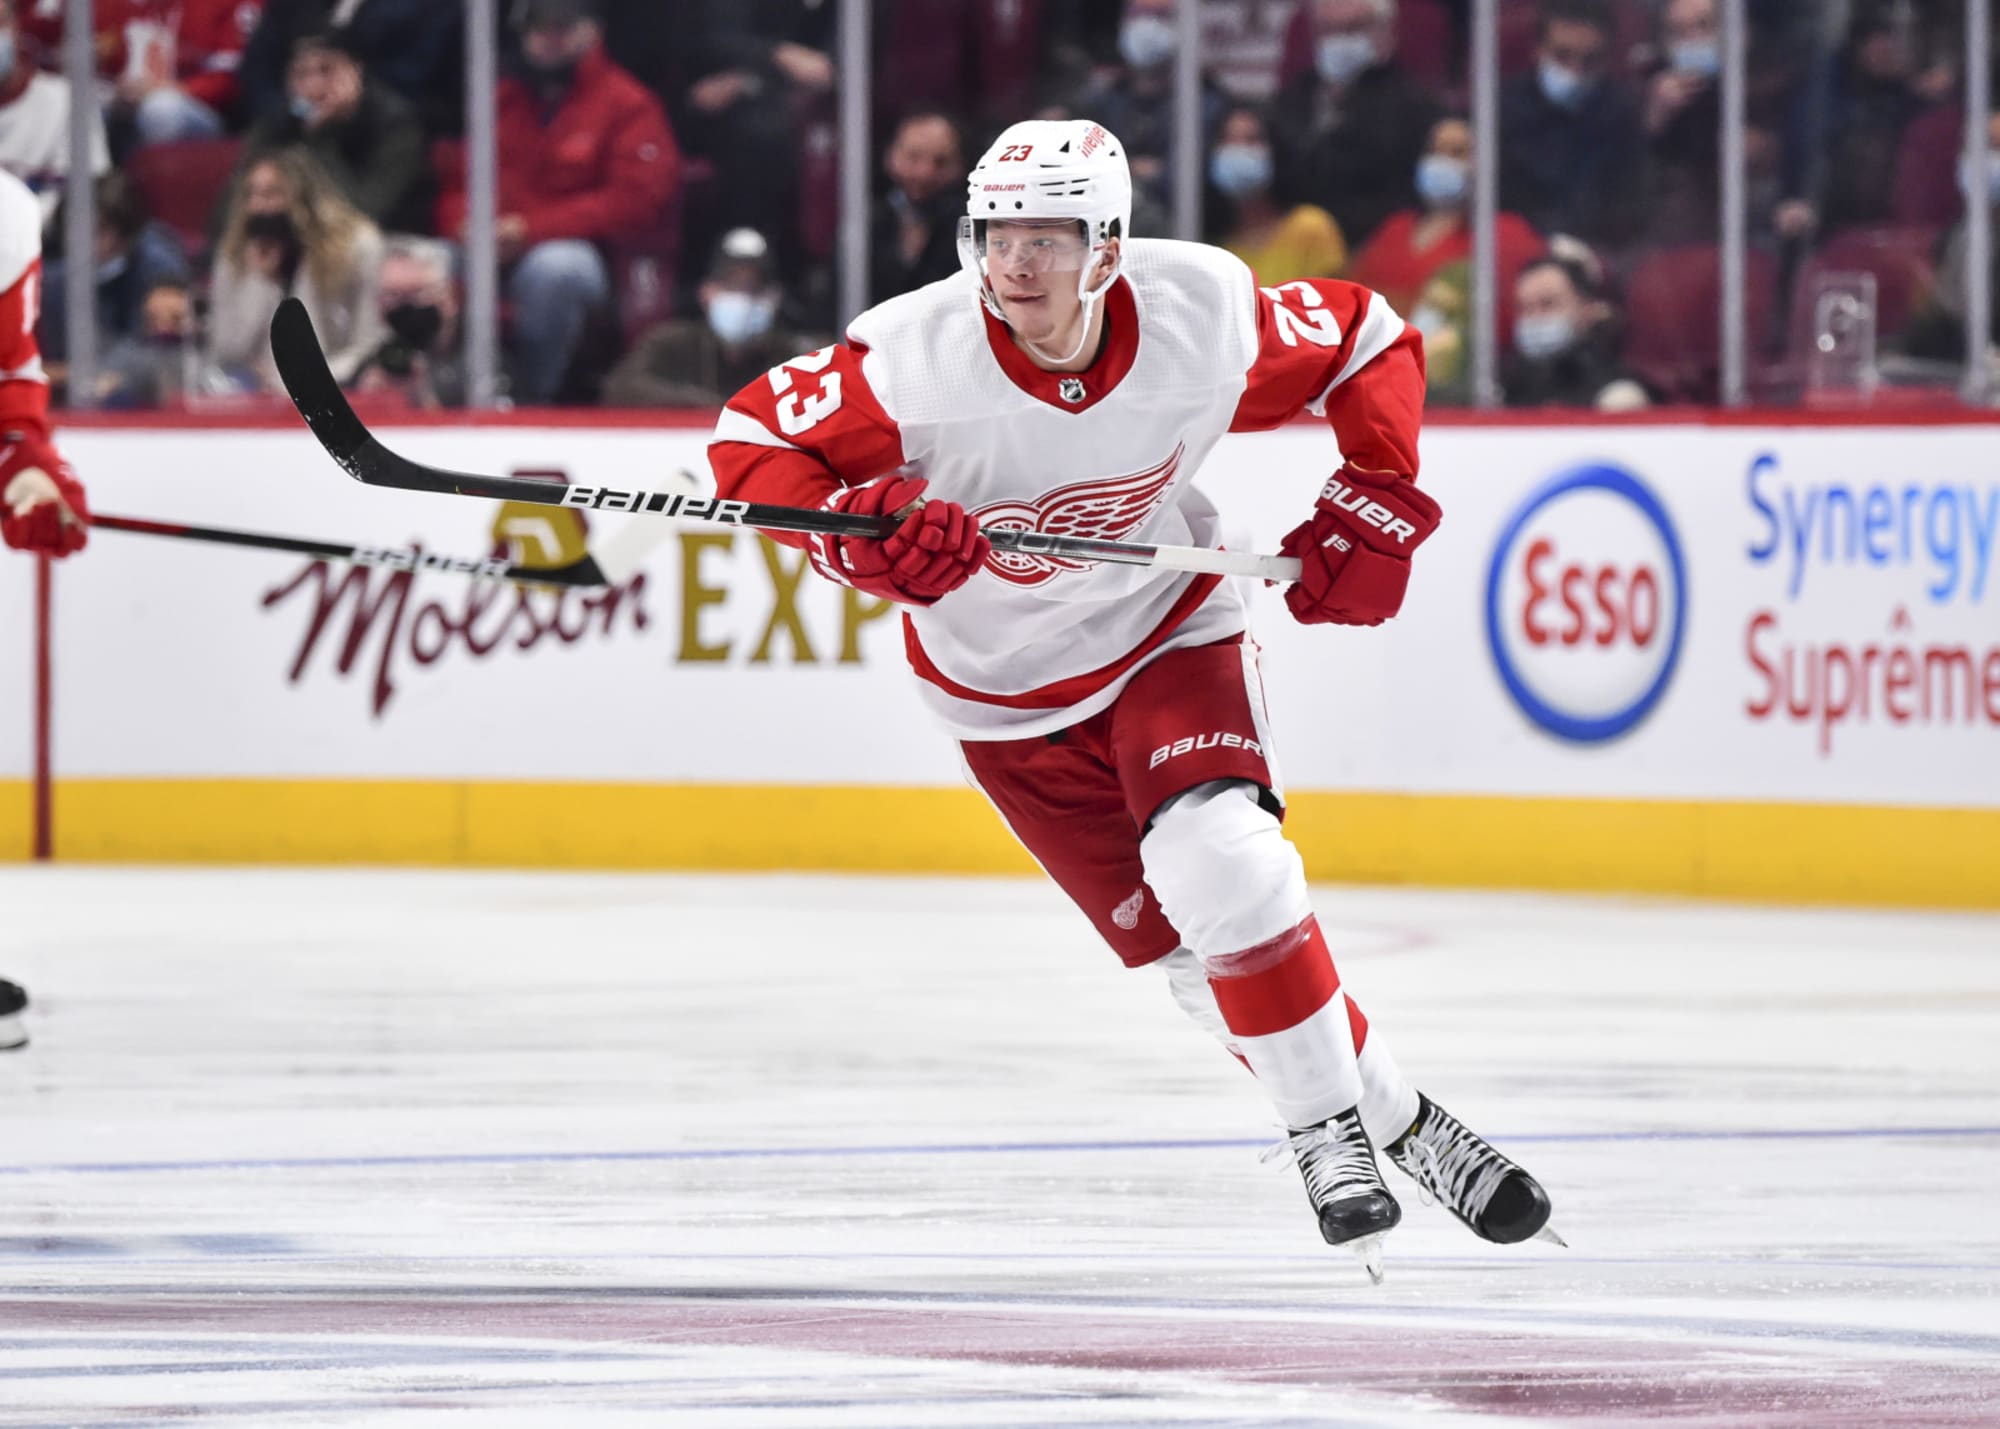 Detroit Red Wings roster: Who's back, who's not, after NHL season